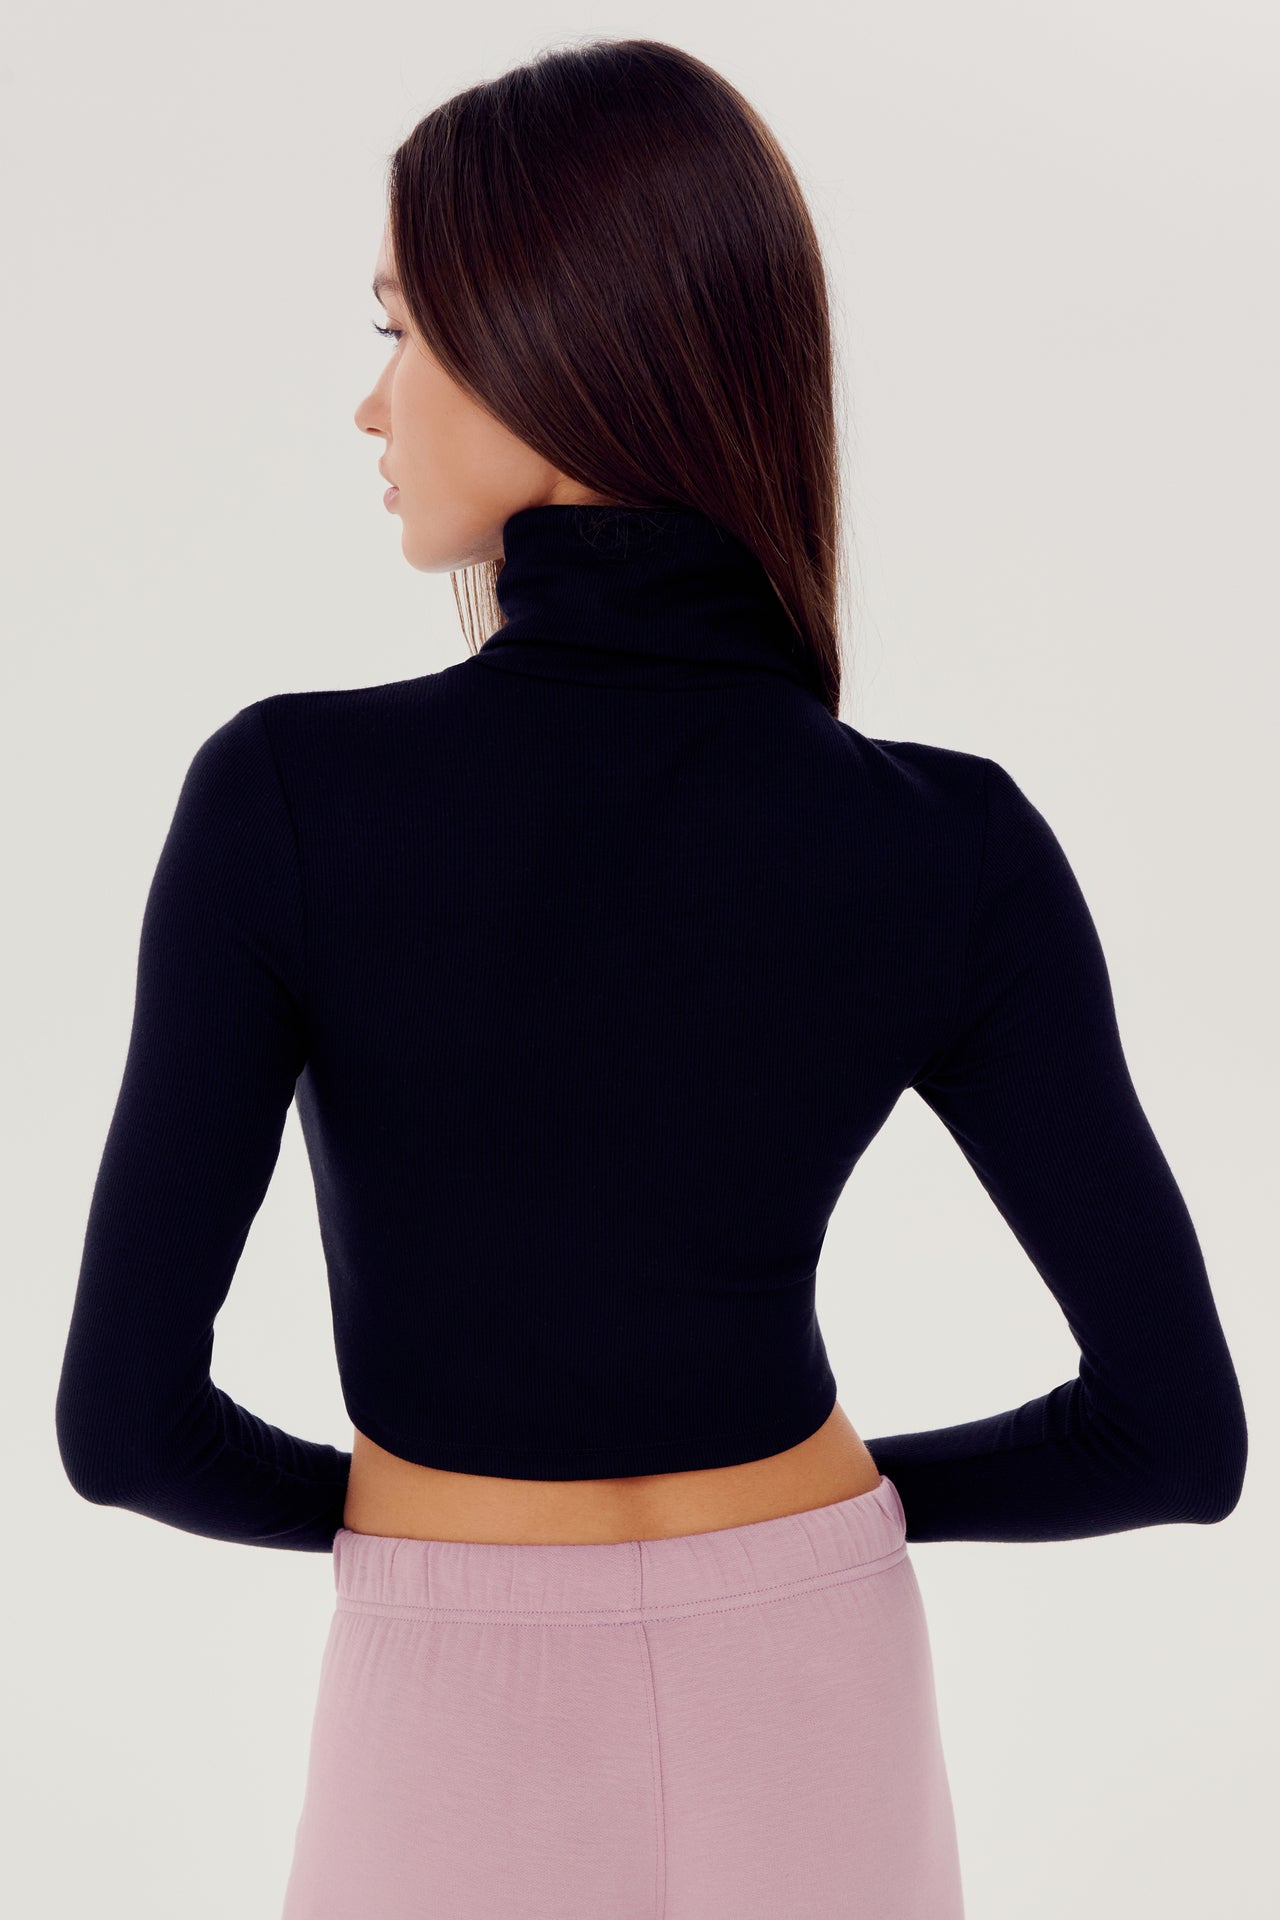 The back view of a woman wearing a cropped length SPLITS59 Jackson Rib Cropped Turtleneck top and high waist leggings.